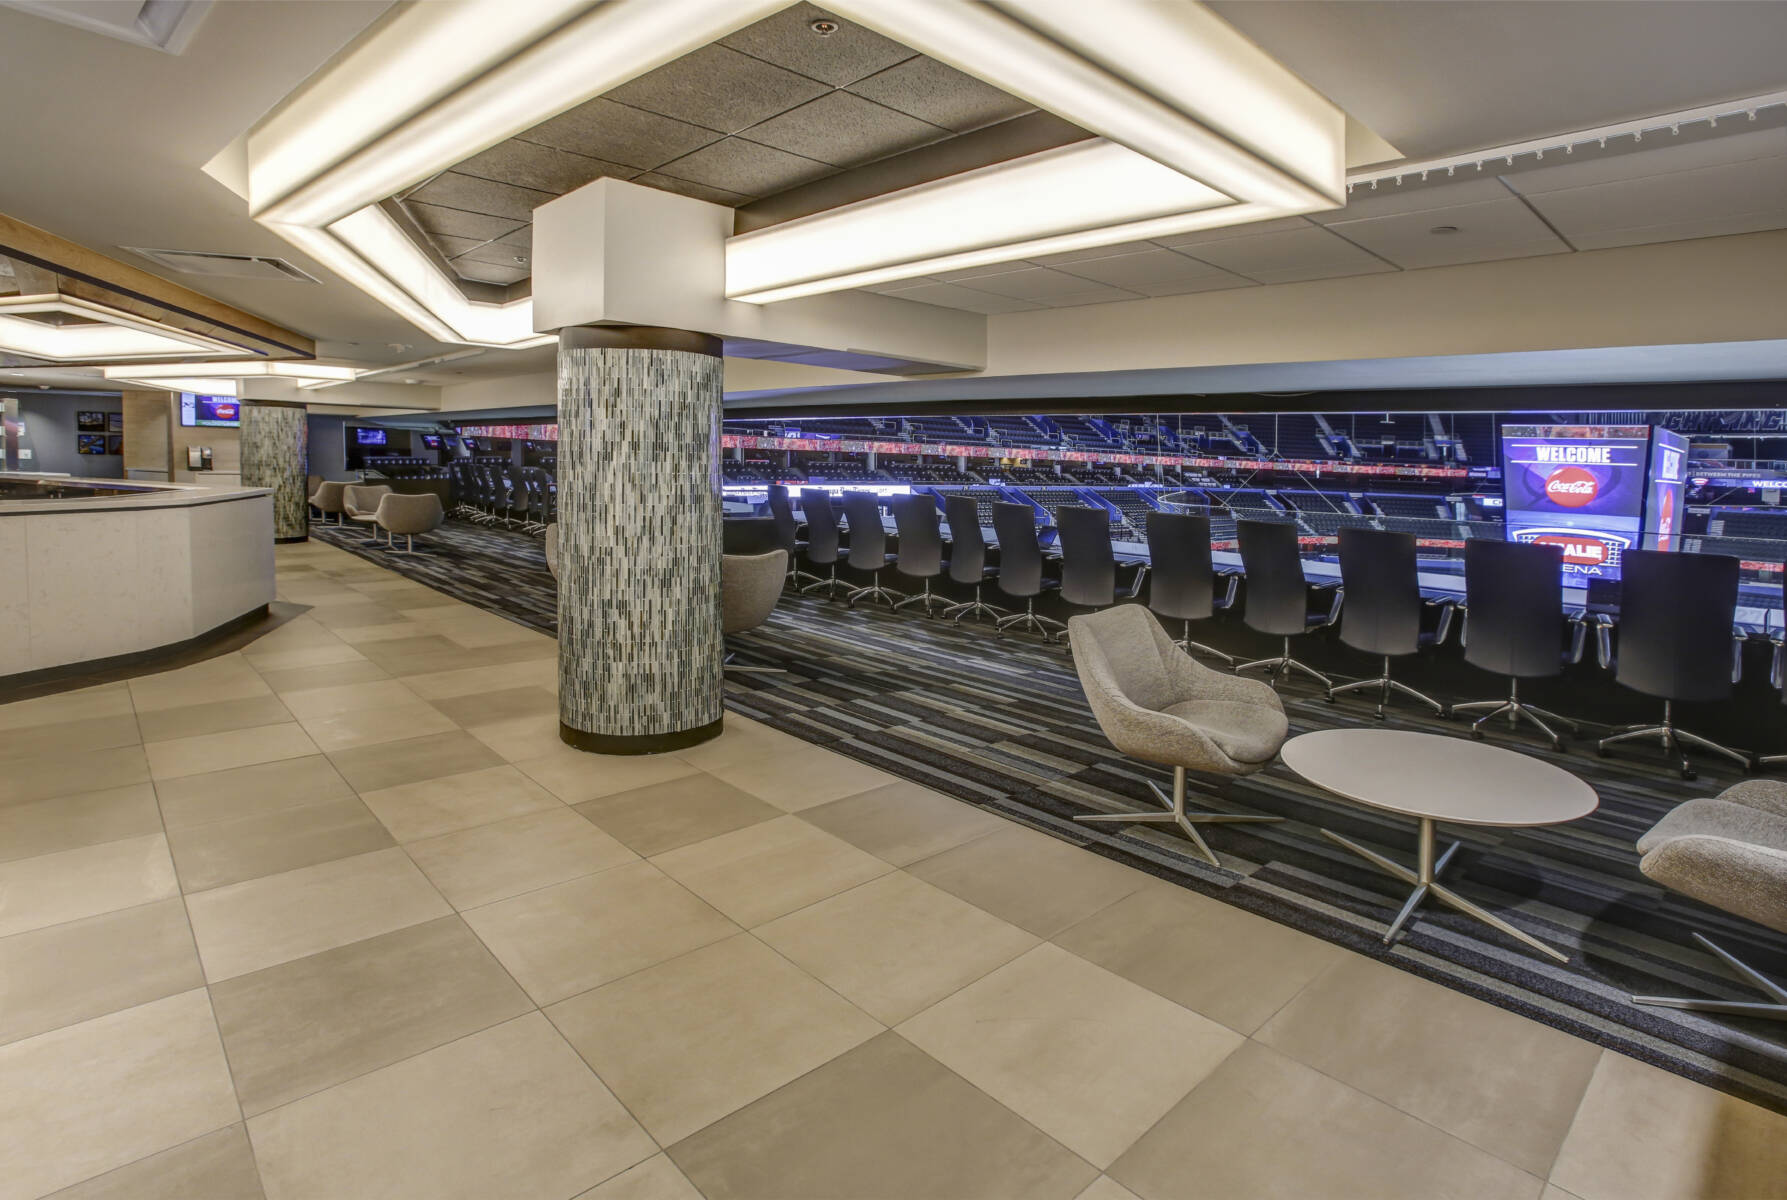 A cream-tiled corridor framing the carpeted stadium seating at Amalie Arena. This image demonstrates this company's excellence in multi-purpose sports flooring